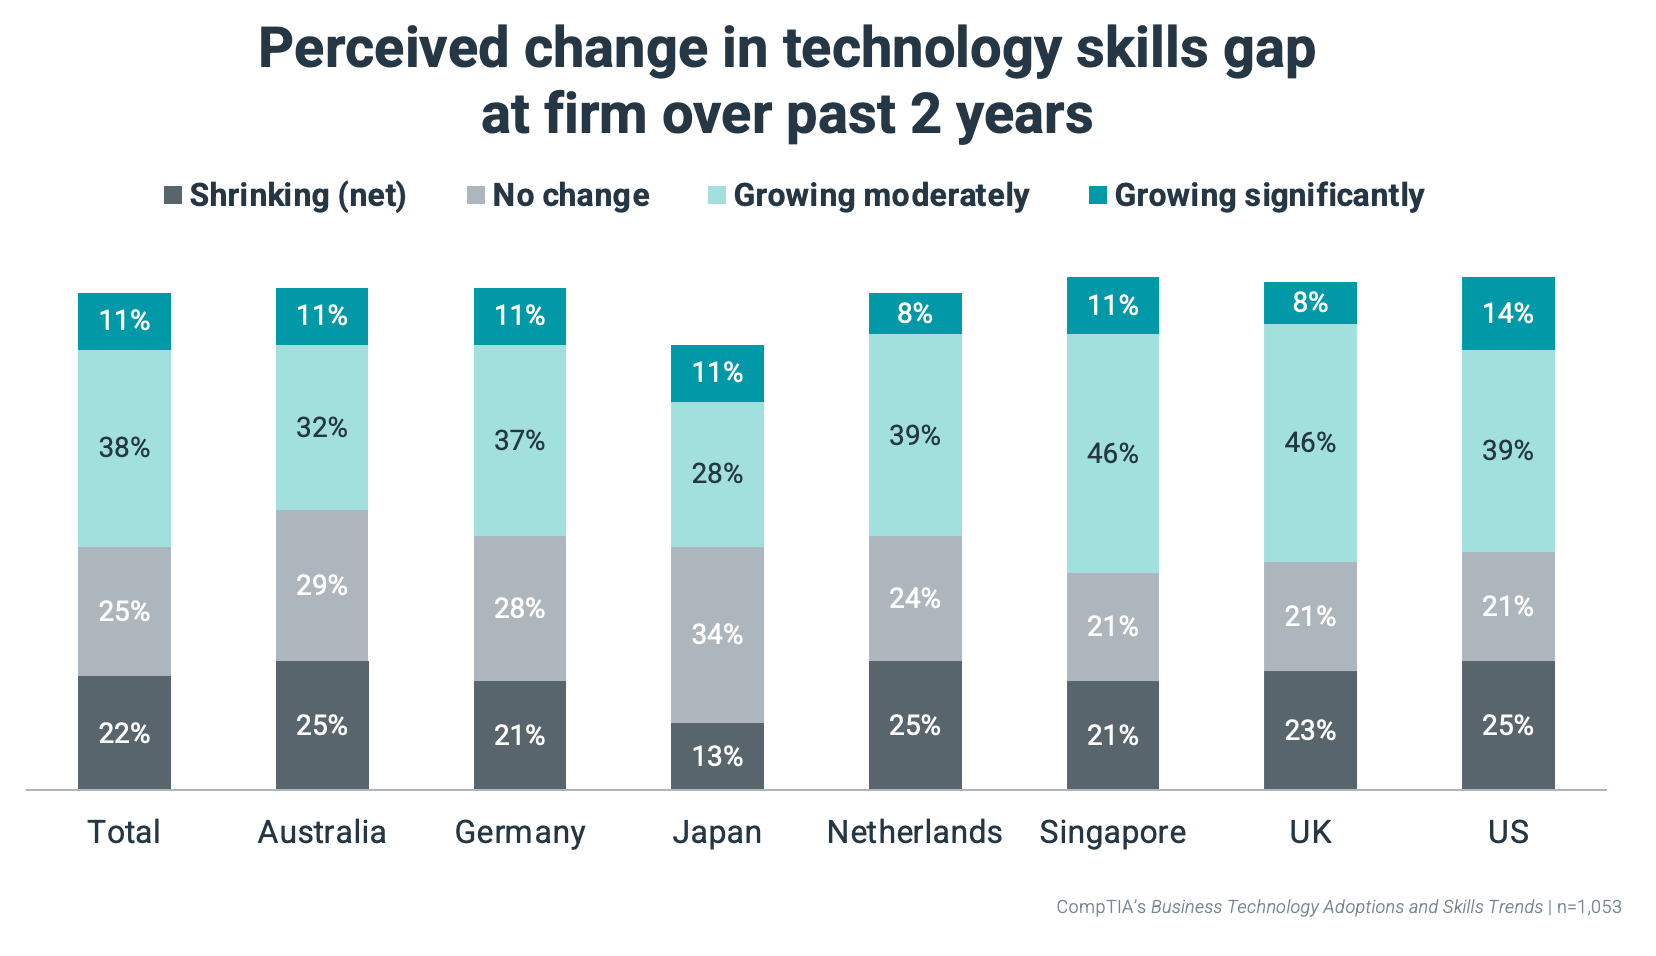 Perceived change in technology skills gap at firm over past 2 years